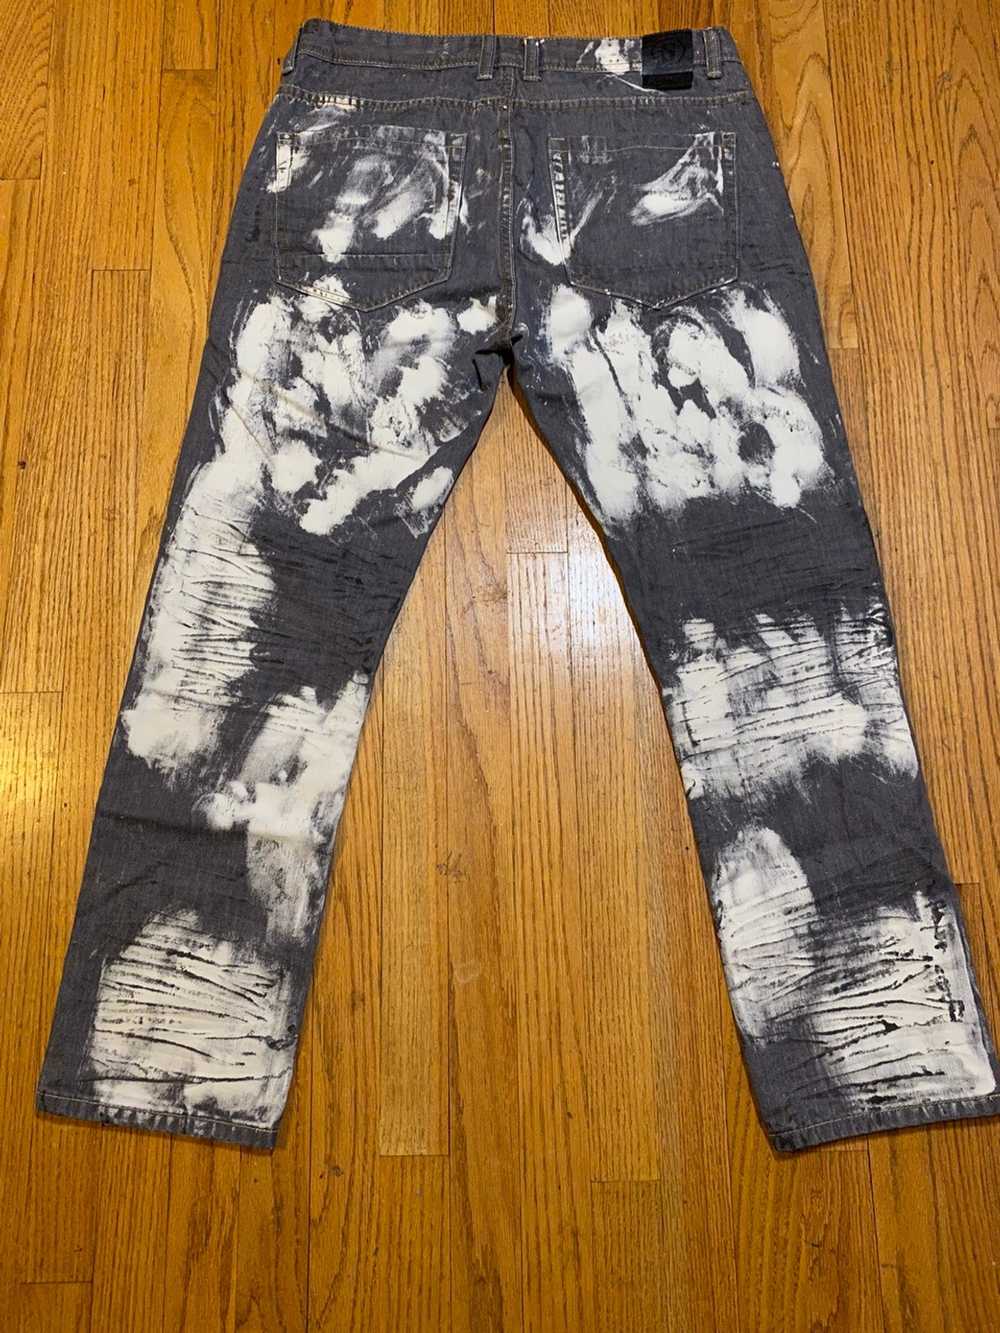 Japanese Brand × Vintage Painted distress jeans - image 2